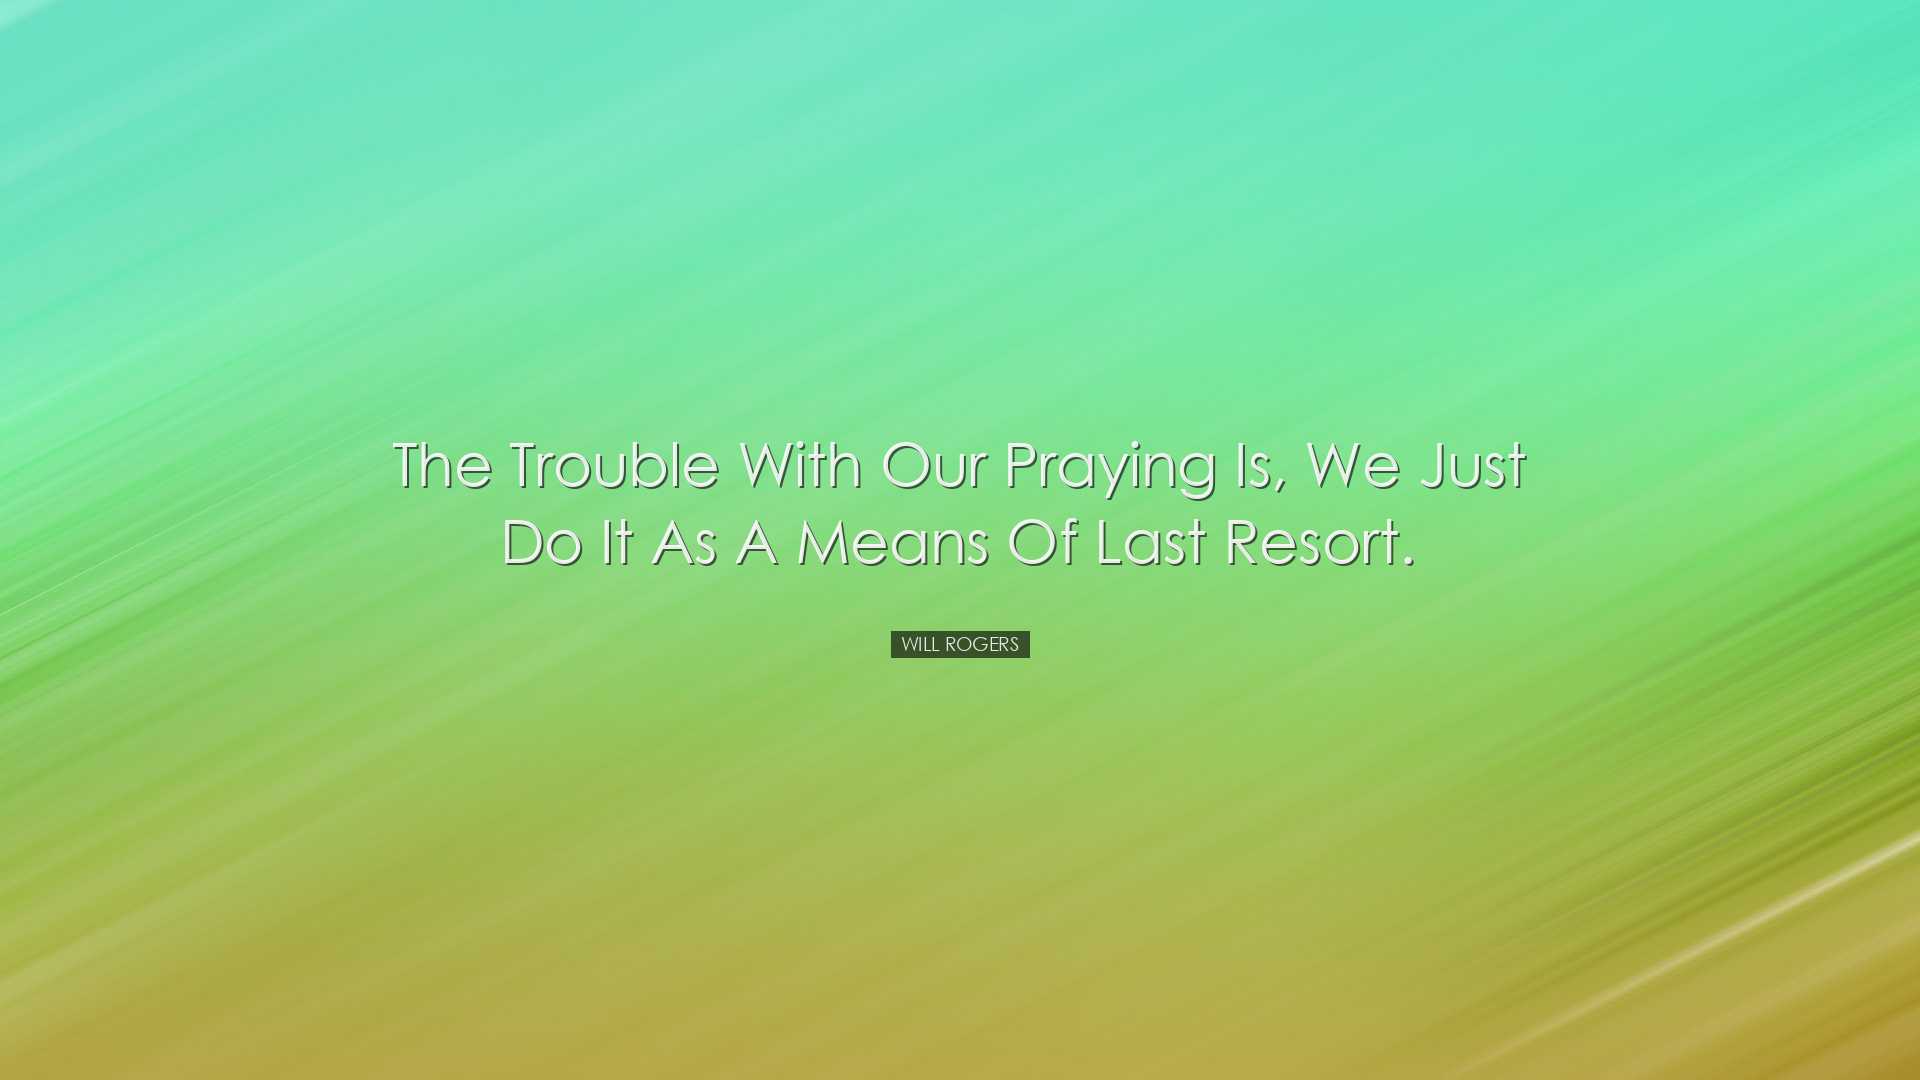 The trouble with our praying is, we just do it as a means of last